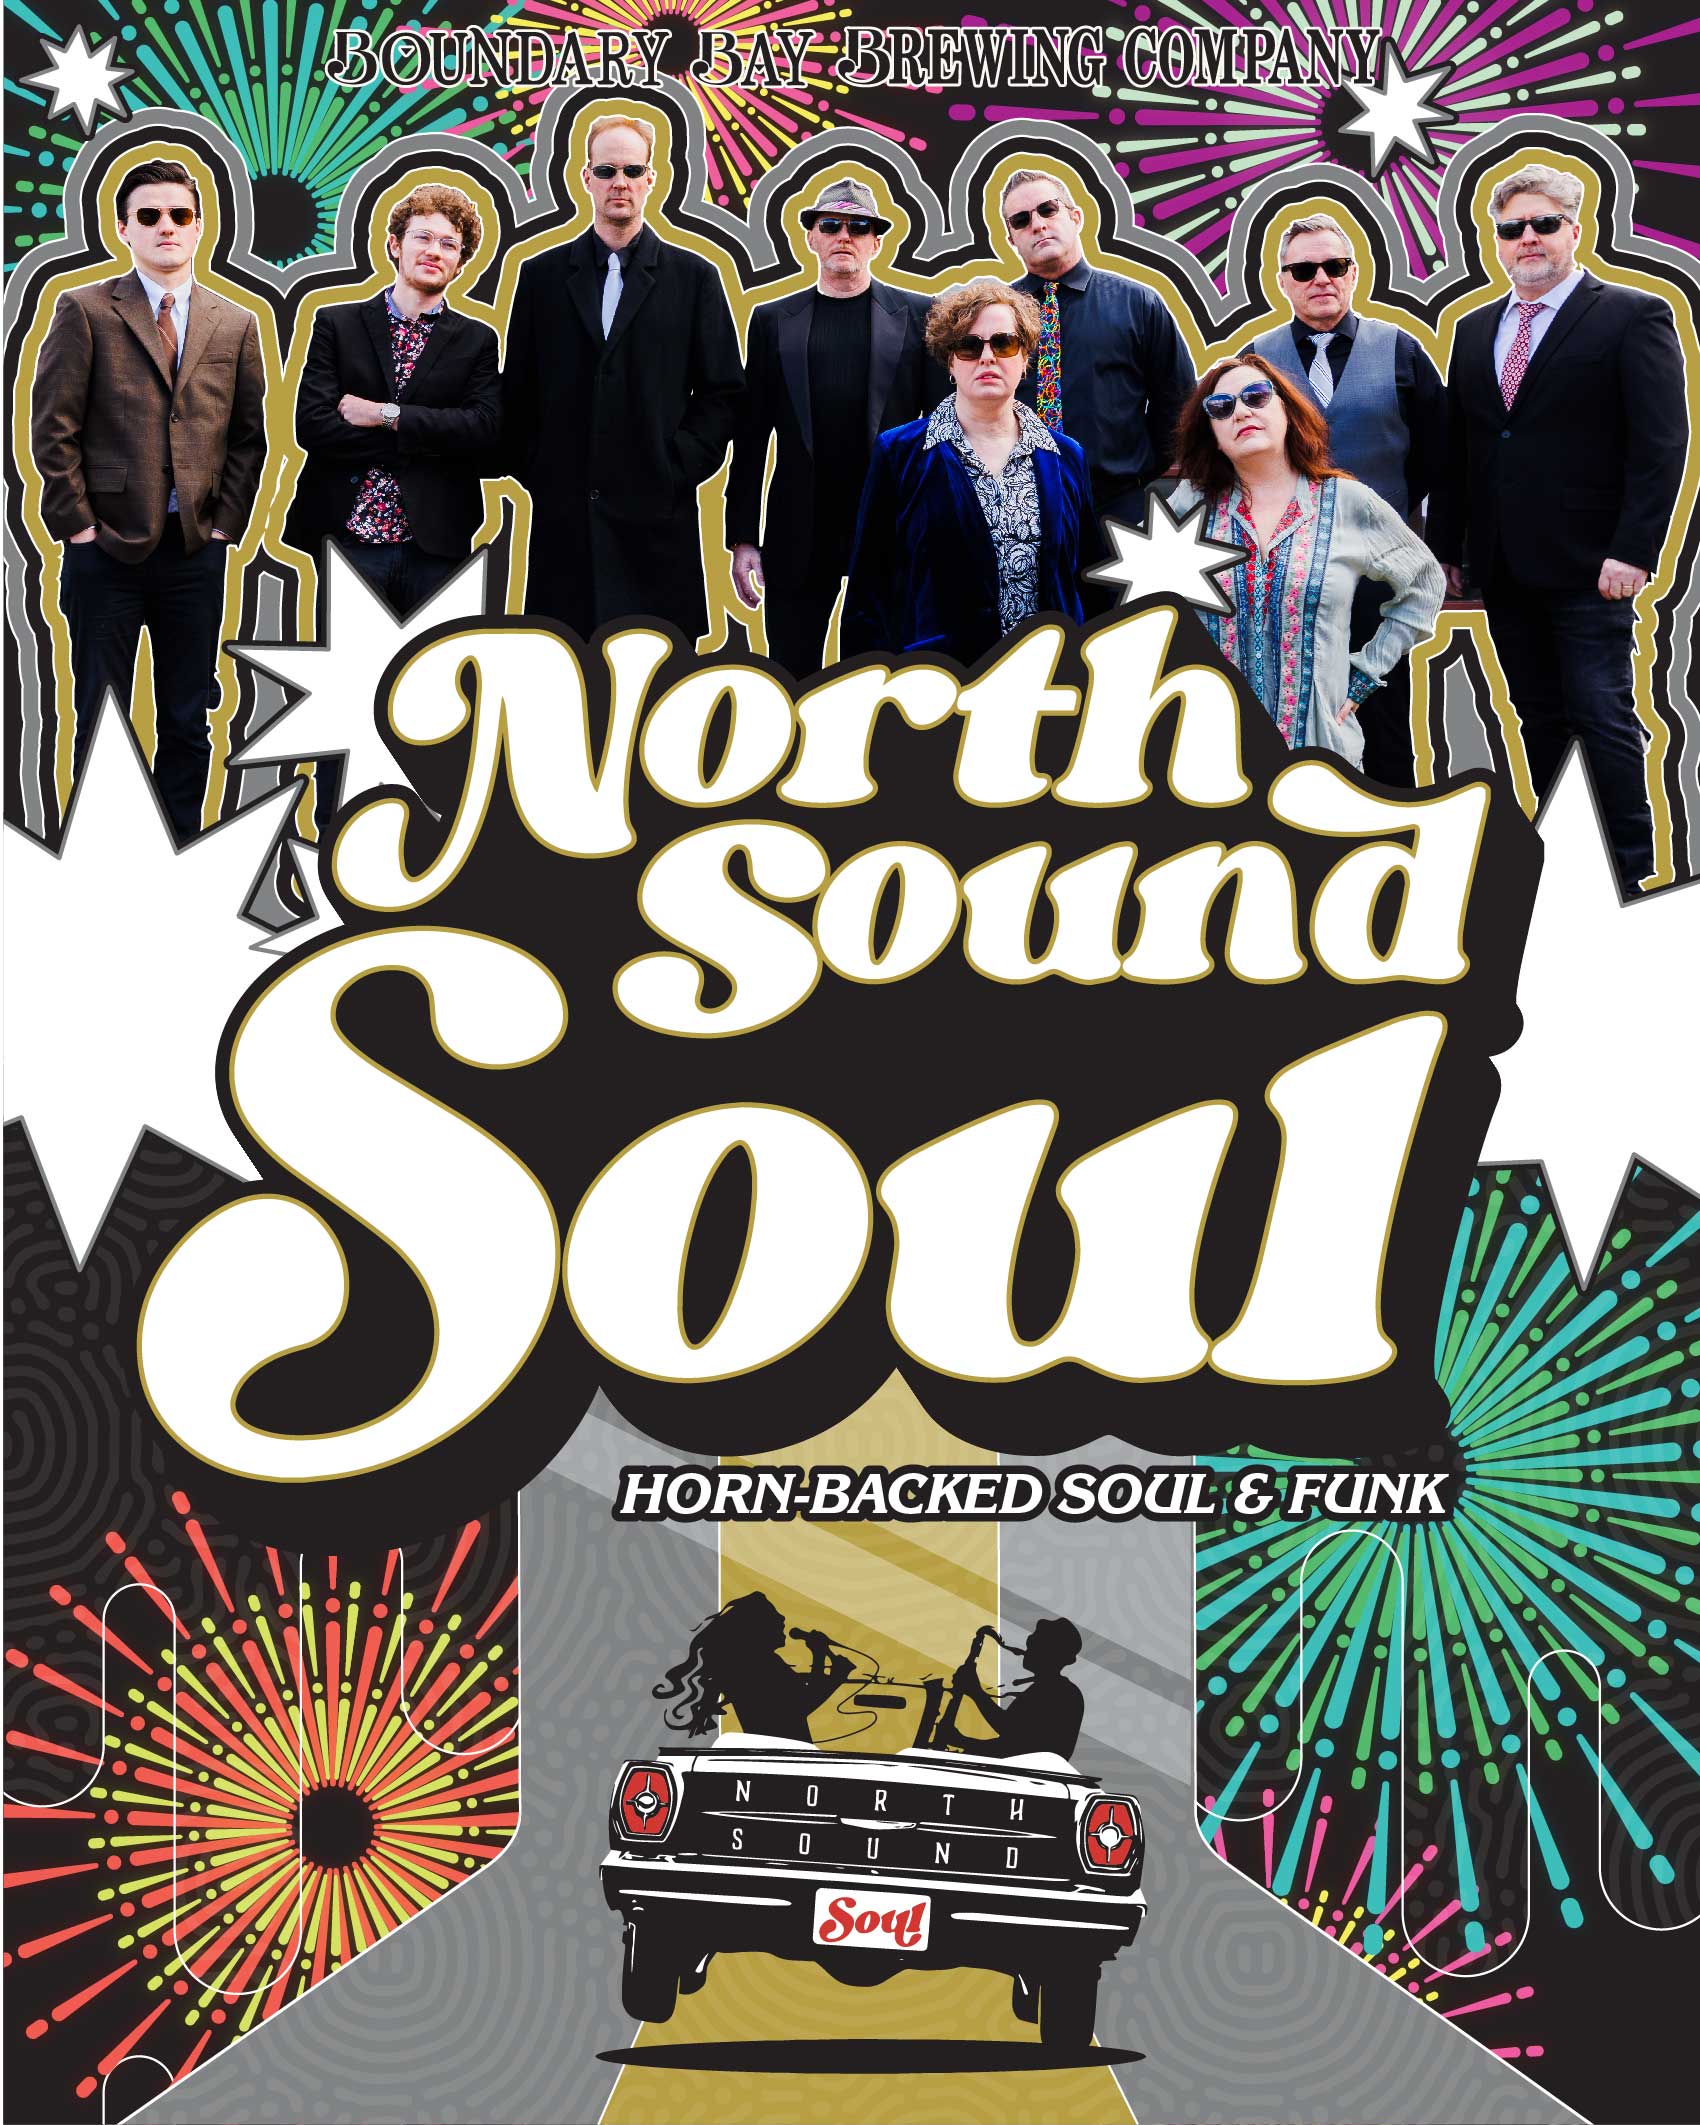 The Northern Sounds